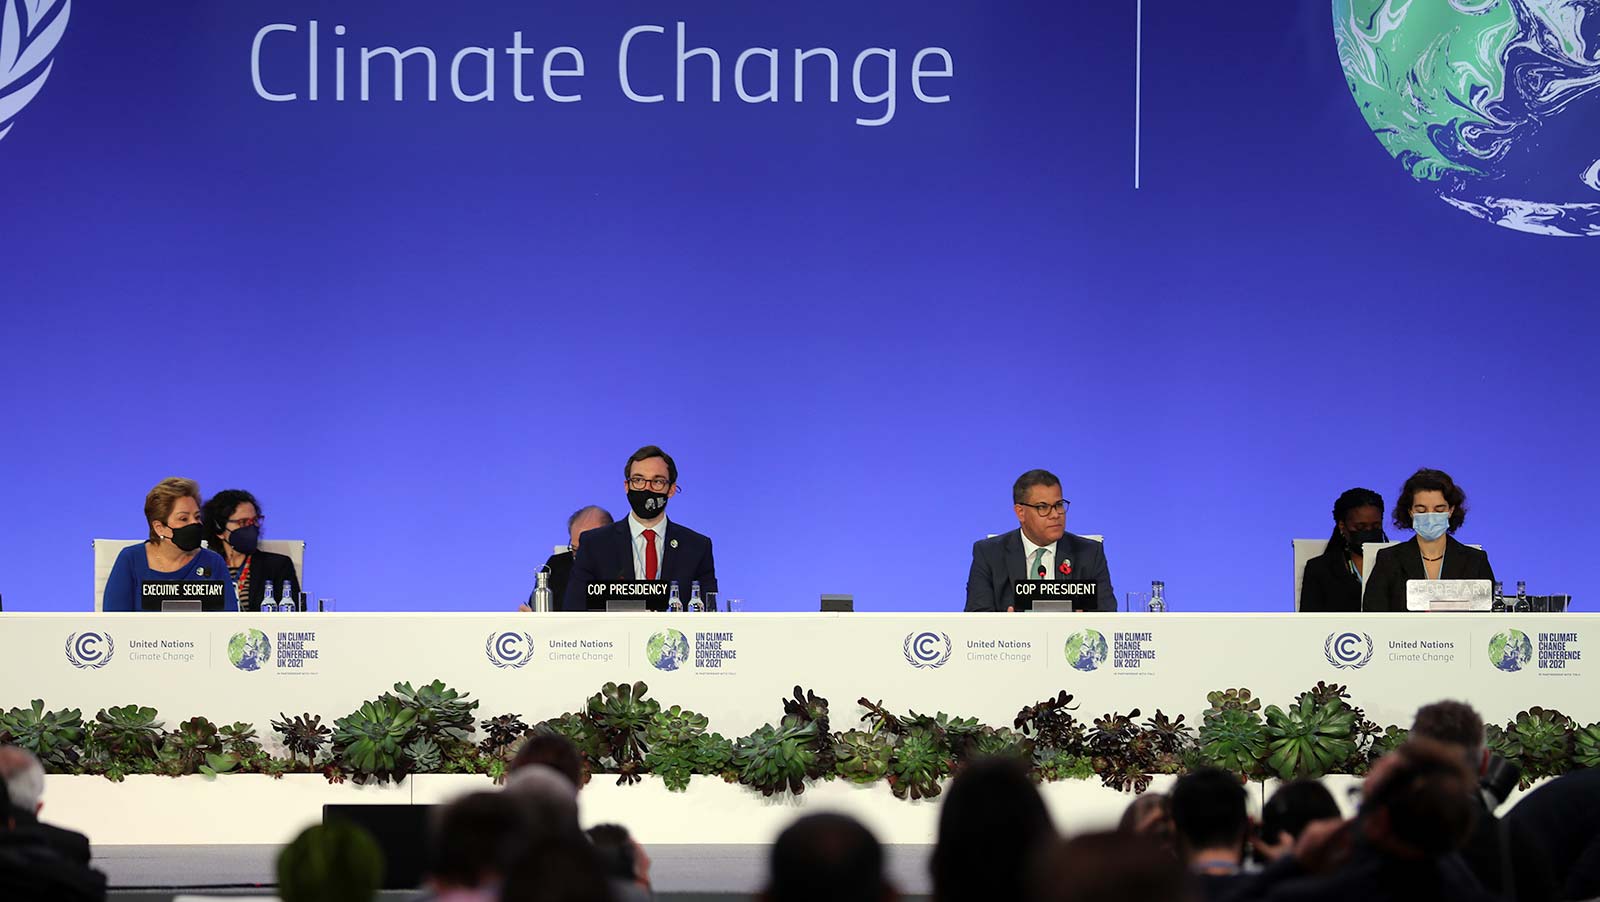 COP26 has gone into overtime, as negotiators consider the conference's final decision texts. Photo credit: IISD/ENB.